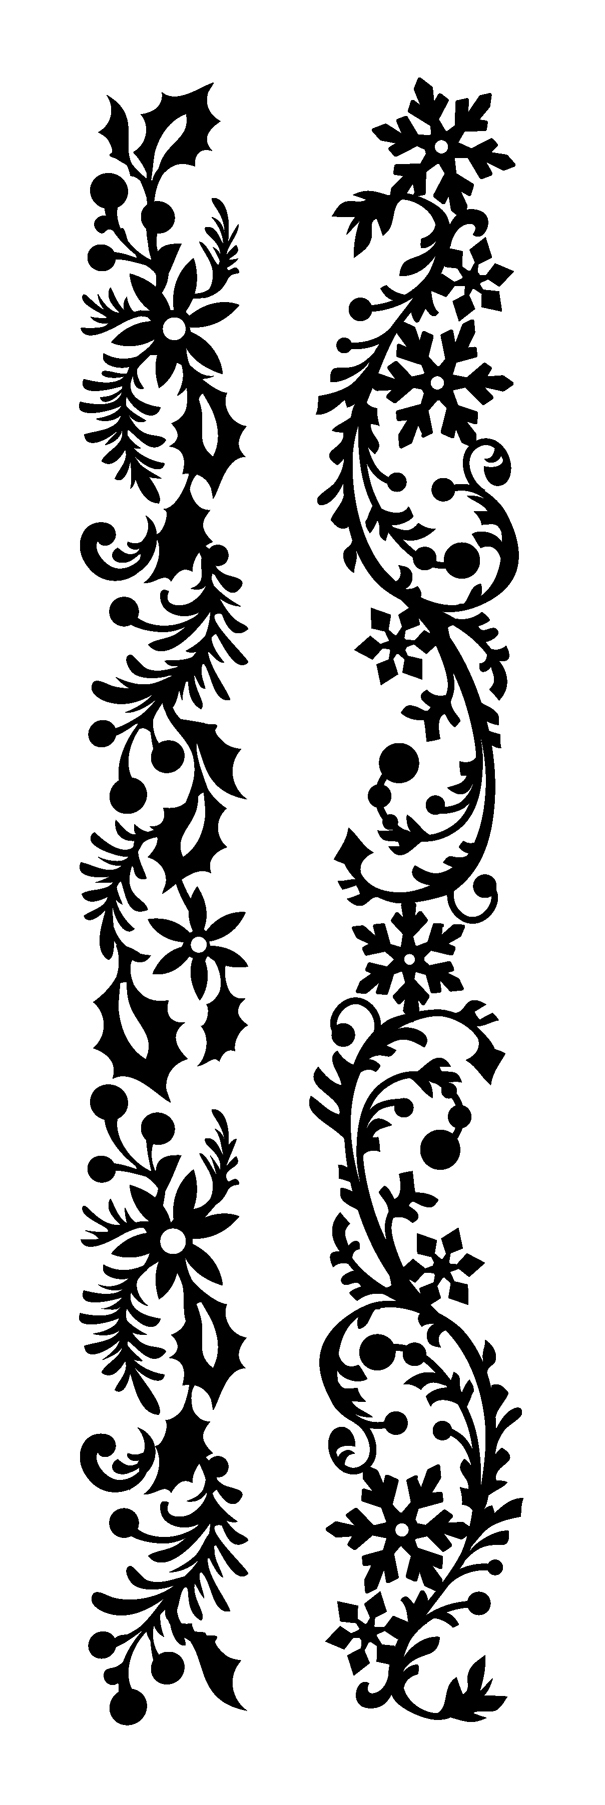 Holly garland. Snowflake garland. Silhouette for cutting machines.